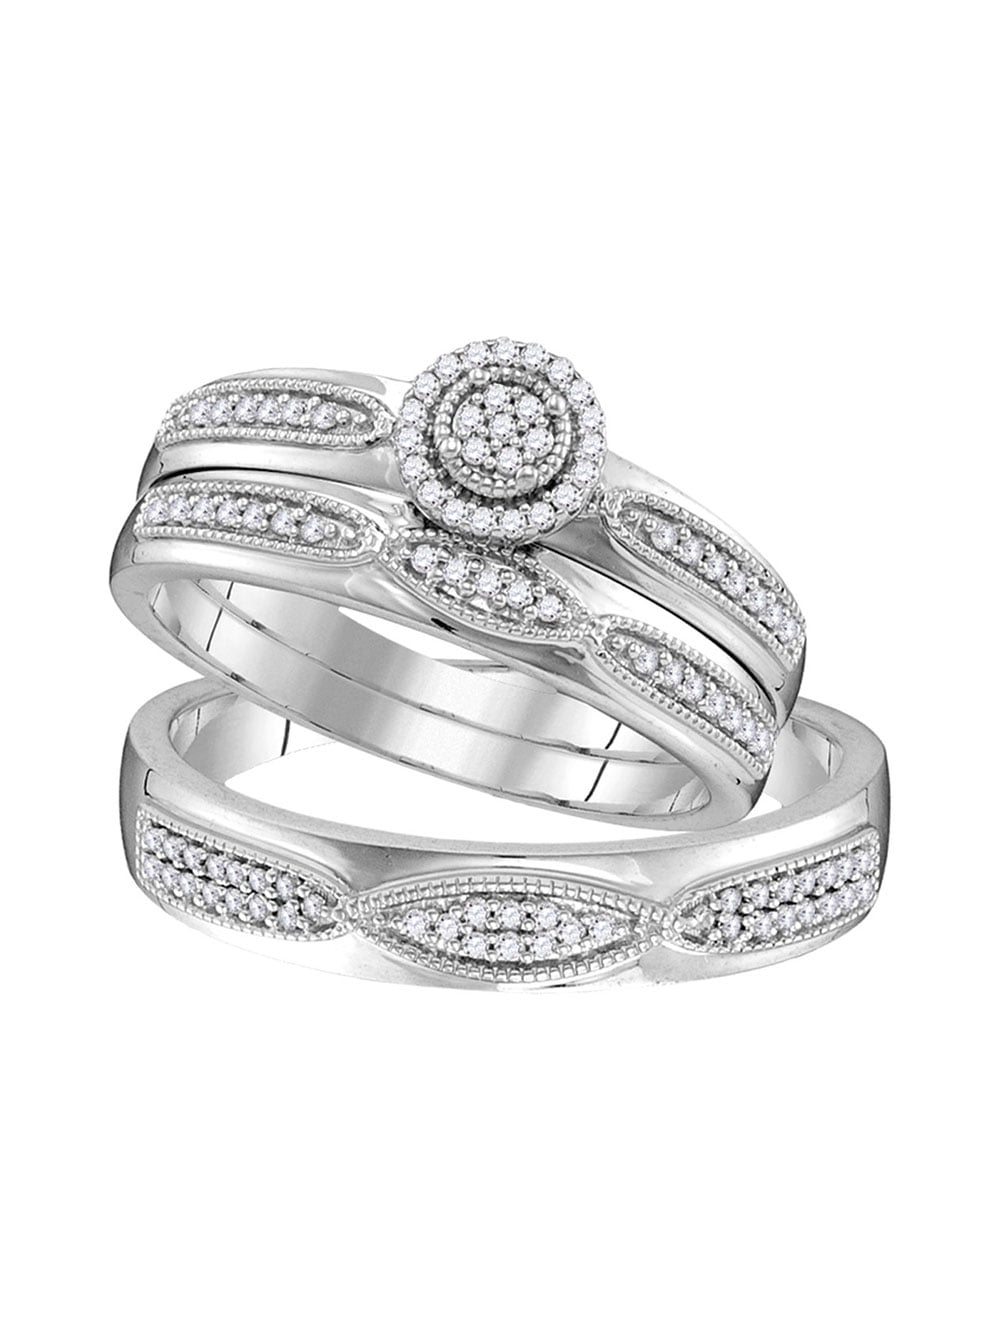 Details about   925 Sterling Silver 0.75 Ct Diamond Wedding Ring Round White Gold Finish Size 4 